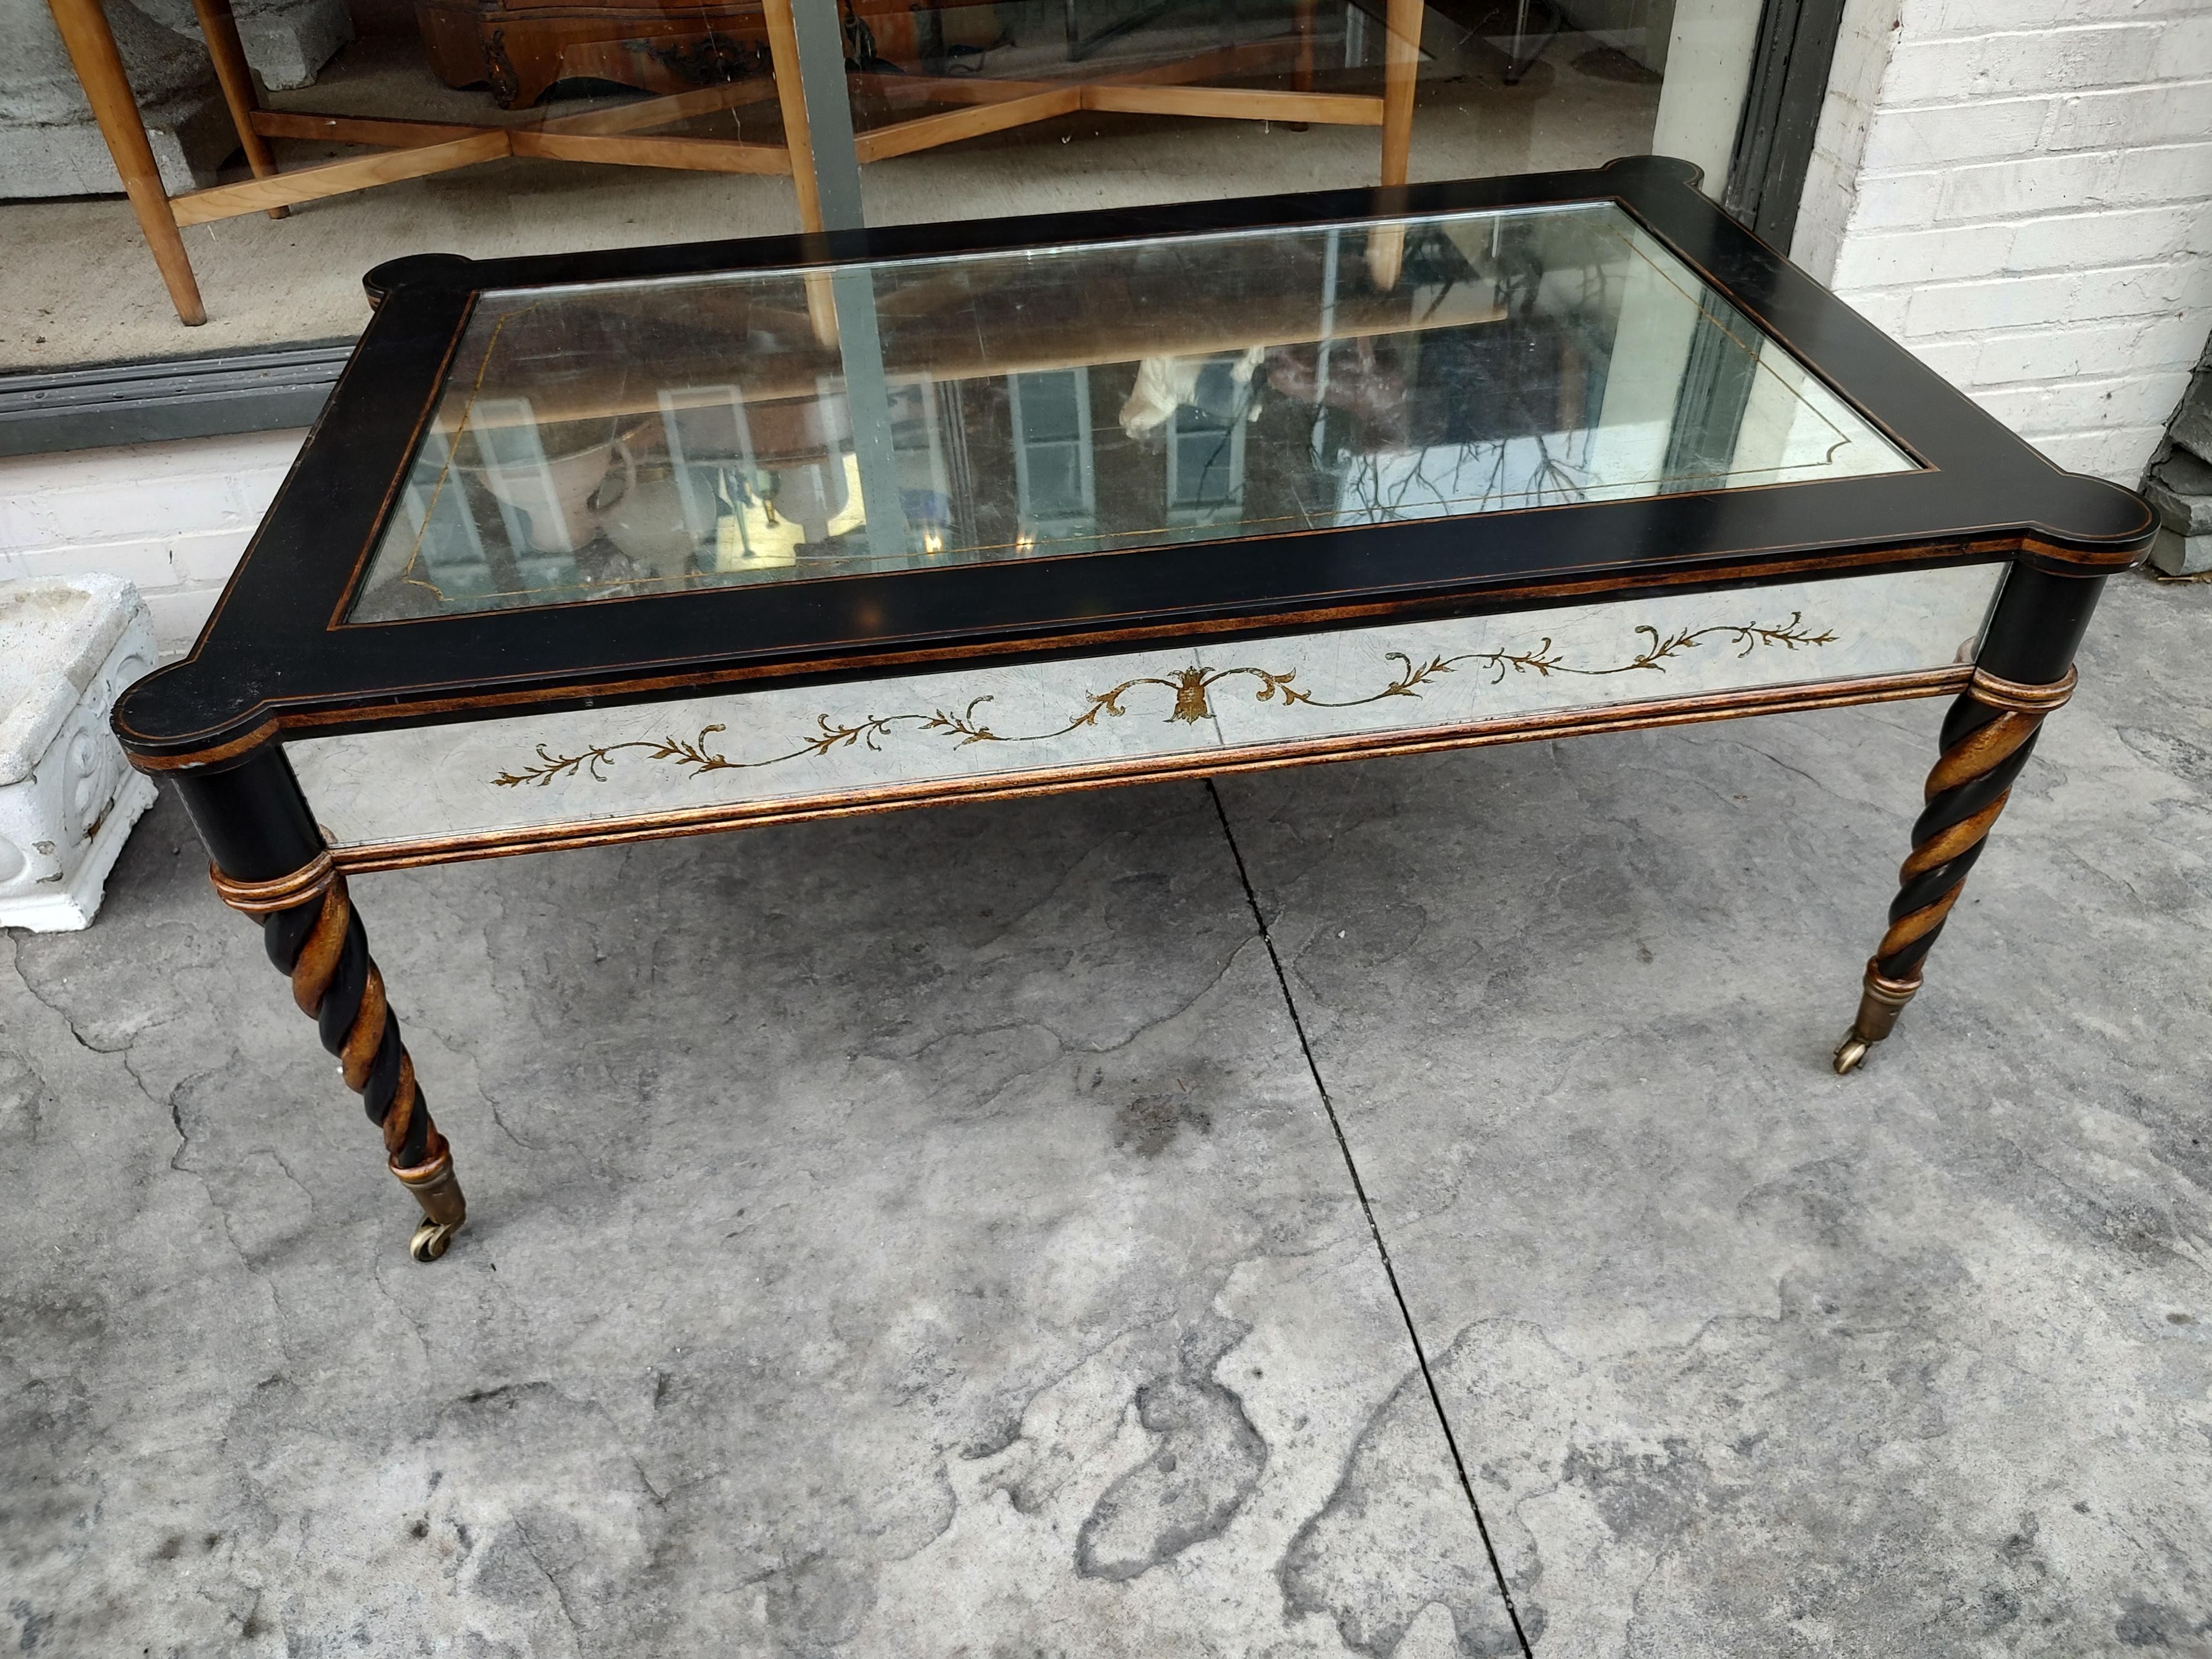 Neoclassical Sheraton Style Cocktail Table with Eglomise Mirrored Panels For Sale 5